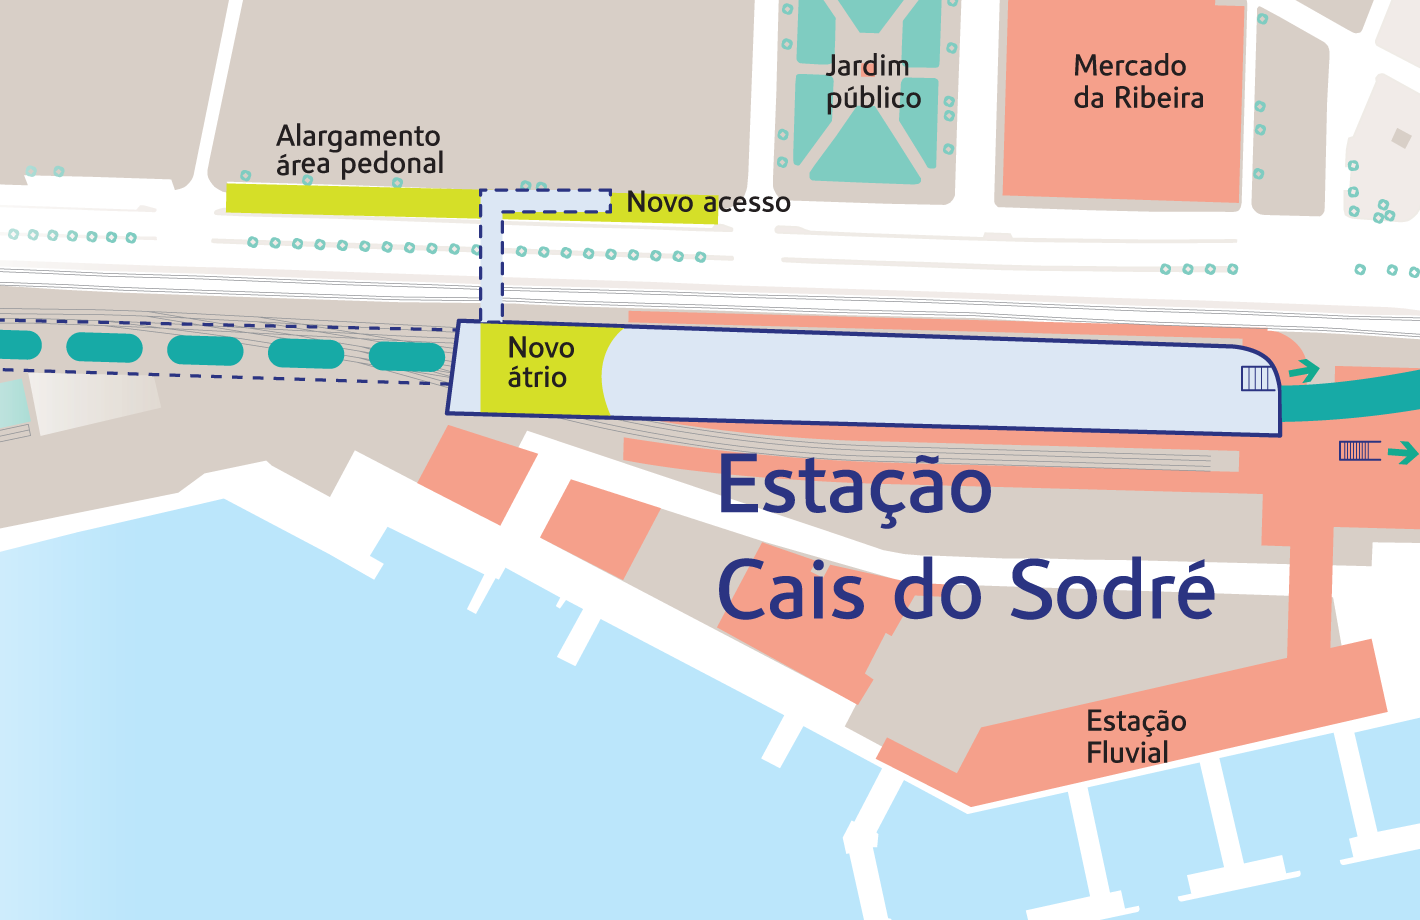 Diagram showing the changes at Cais do Sodré station